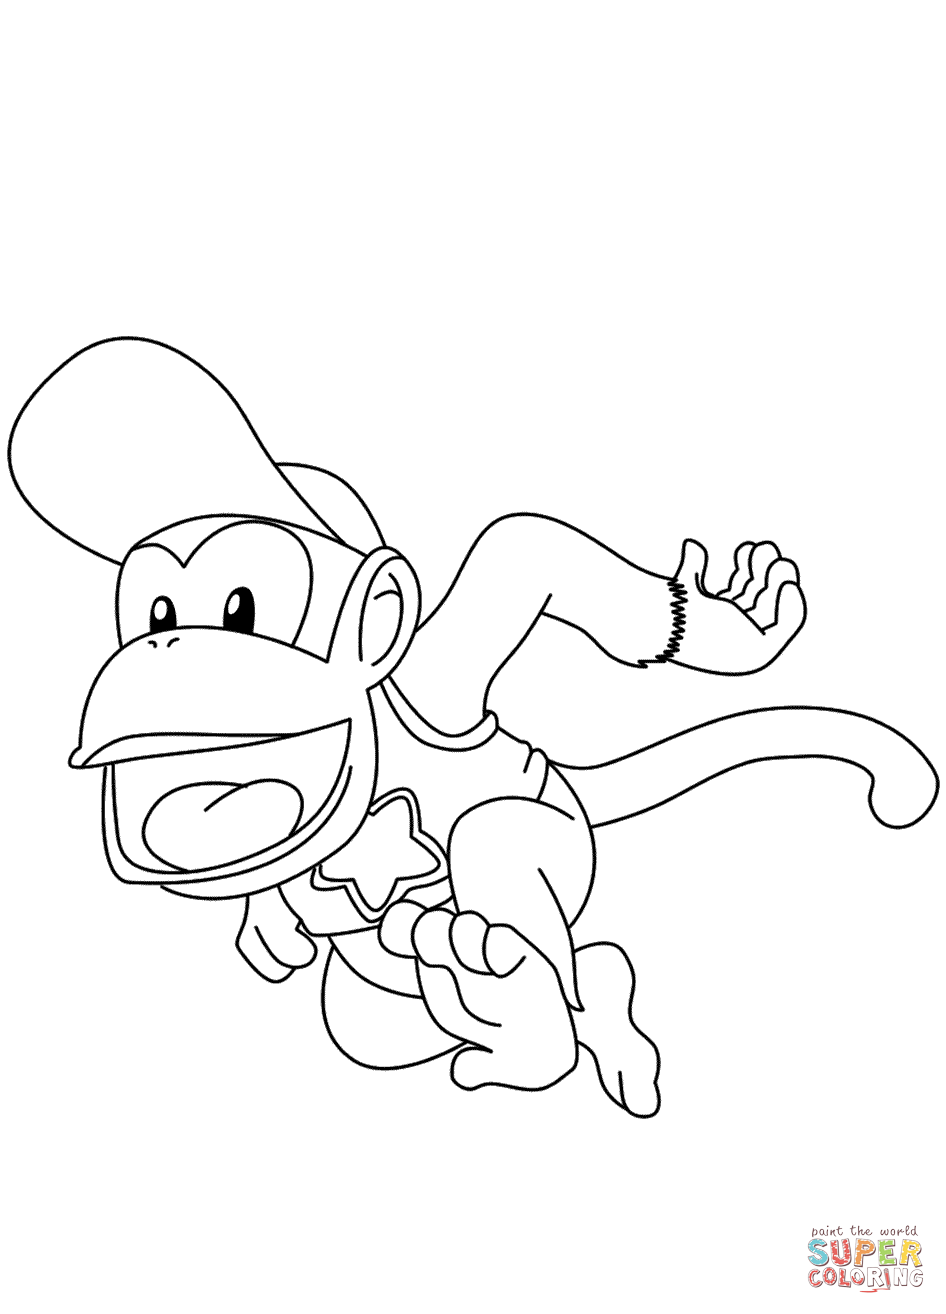 Diddy kong coloring page free printable coloring pages